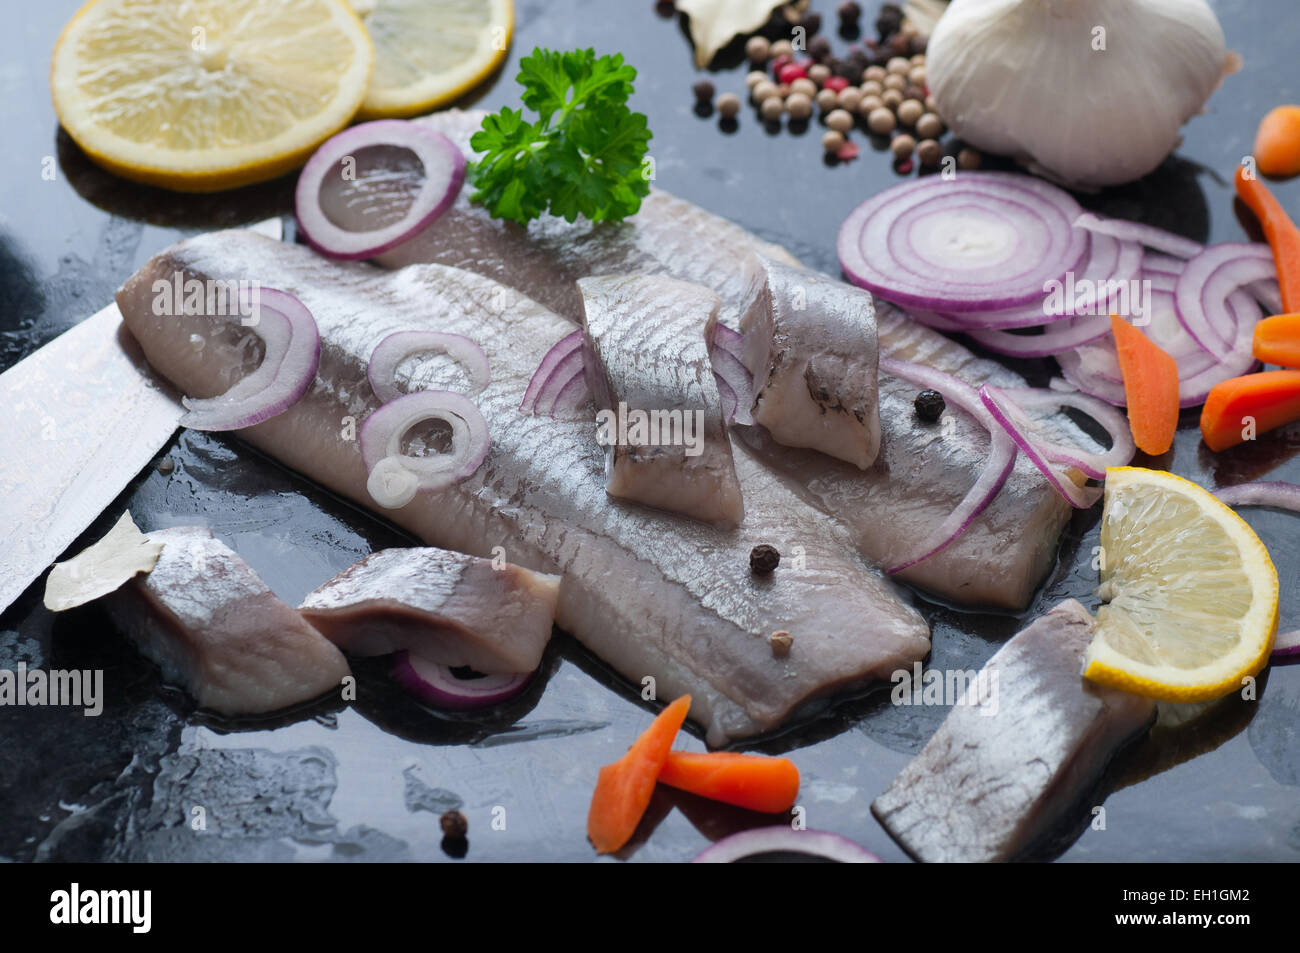 Pickled herring fillet with spices, carrot, onion and lemon. Stock Photo